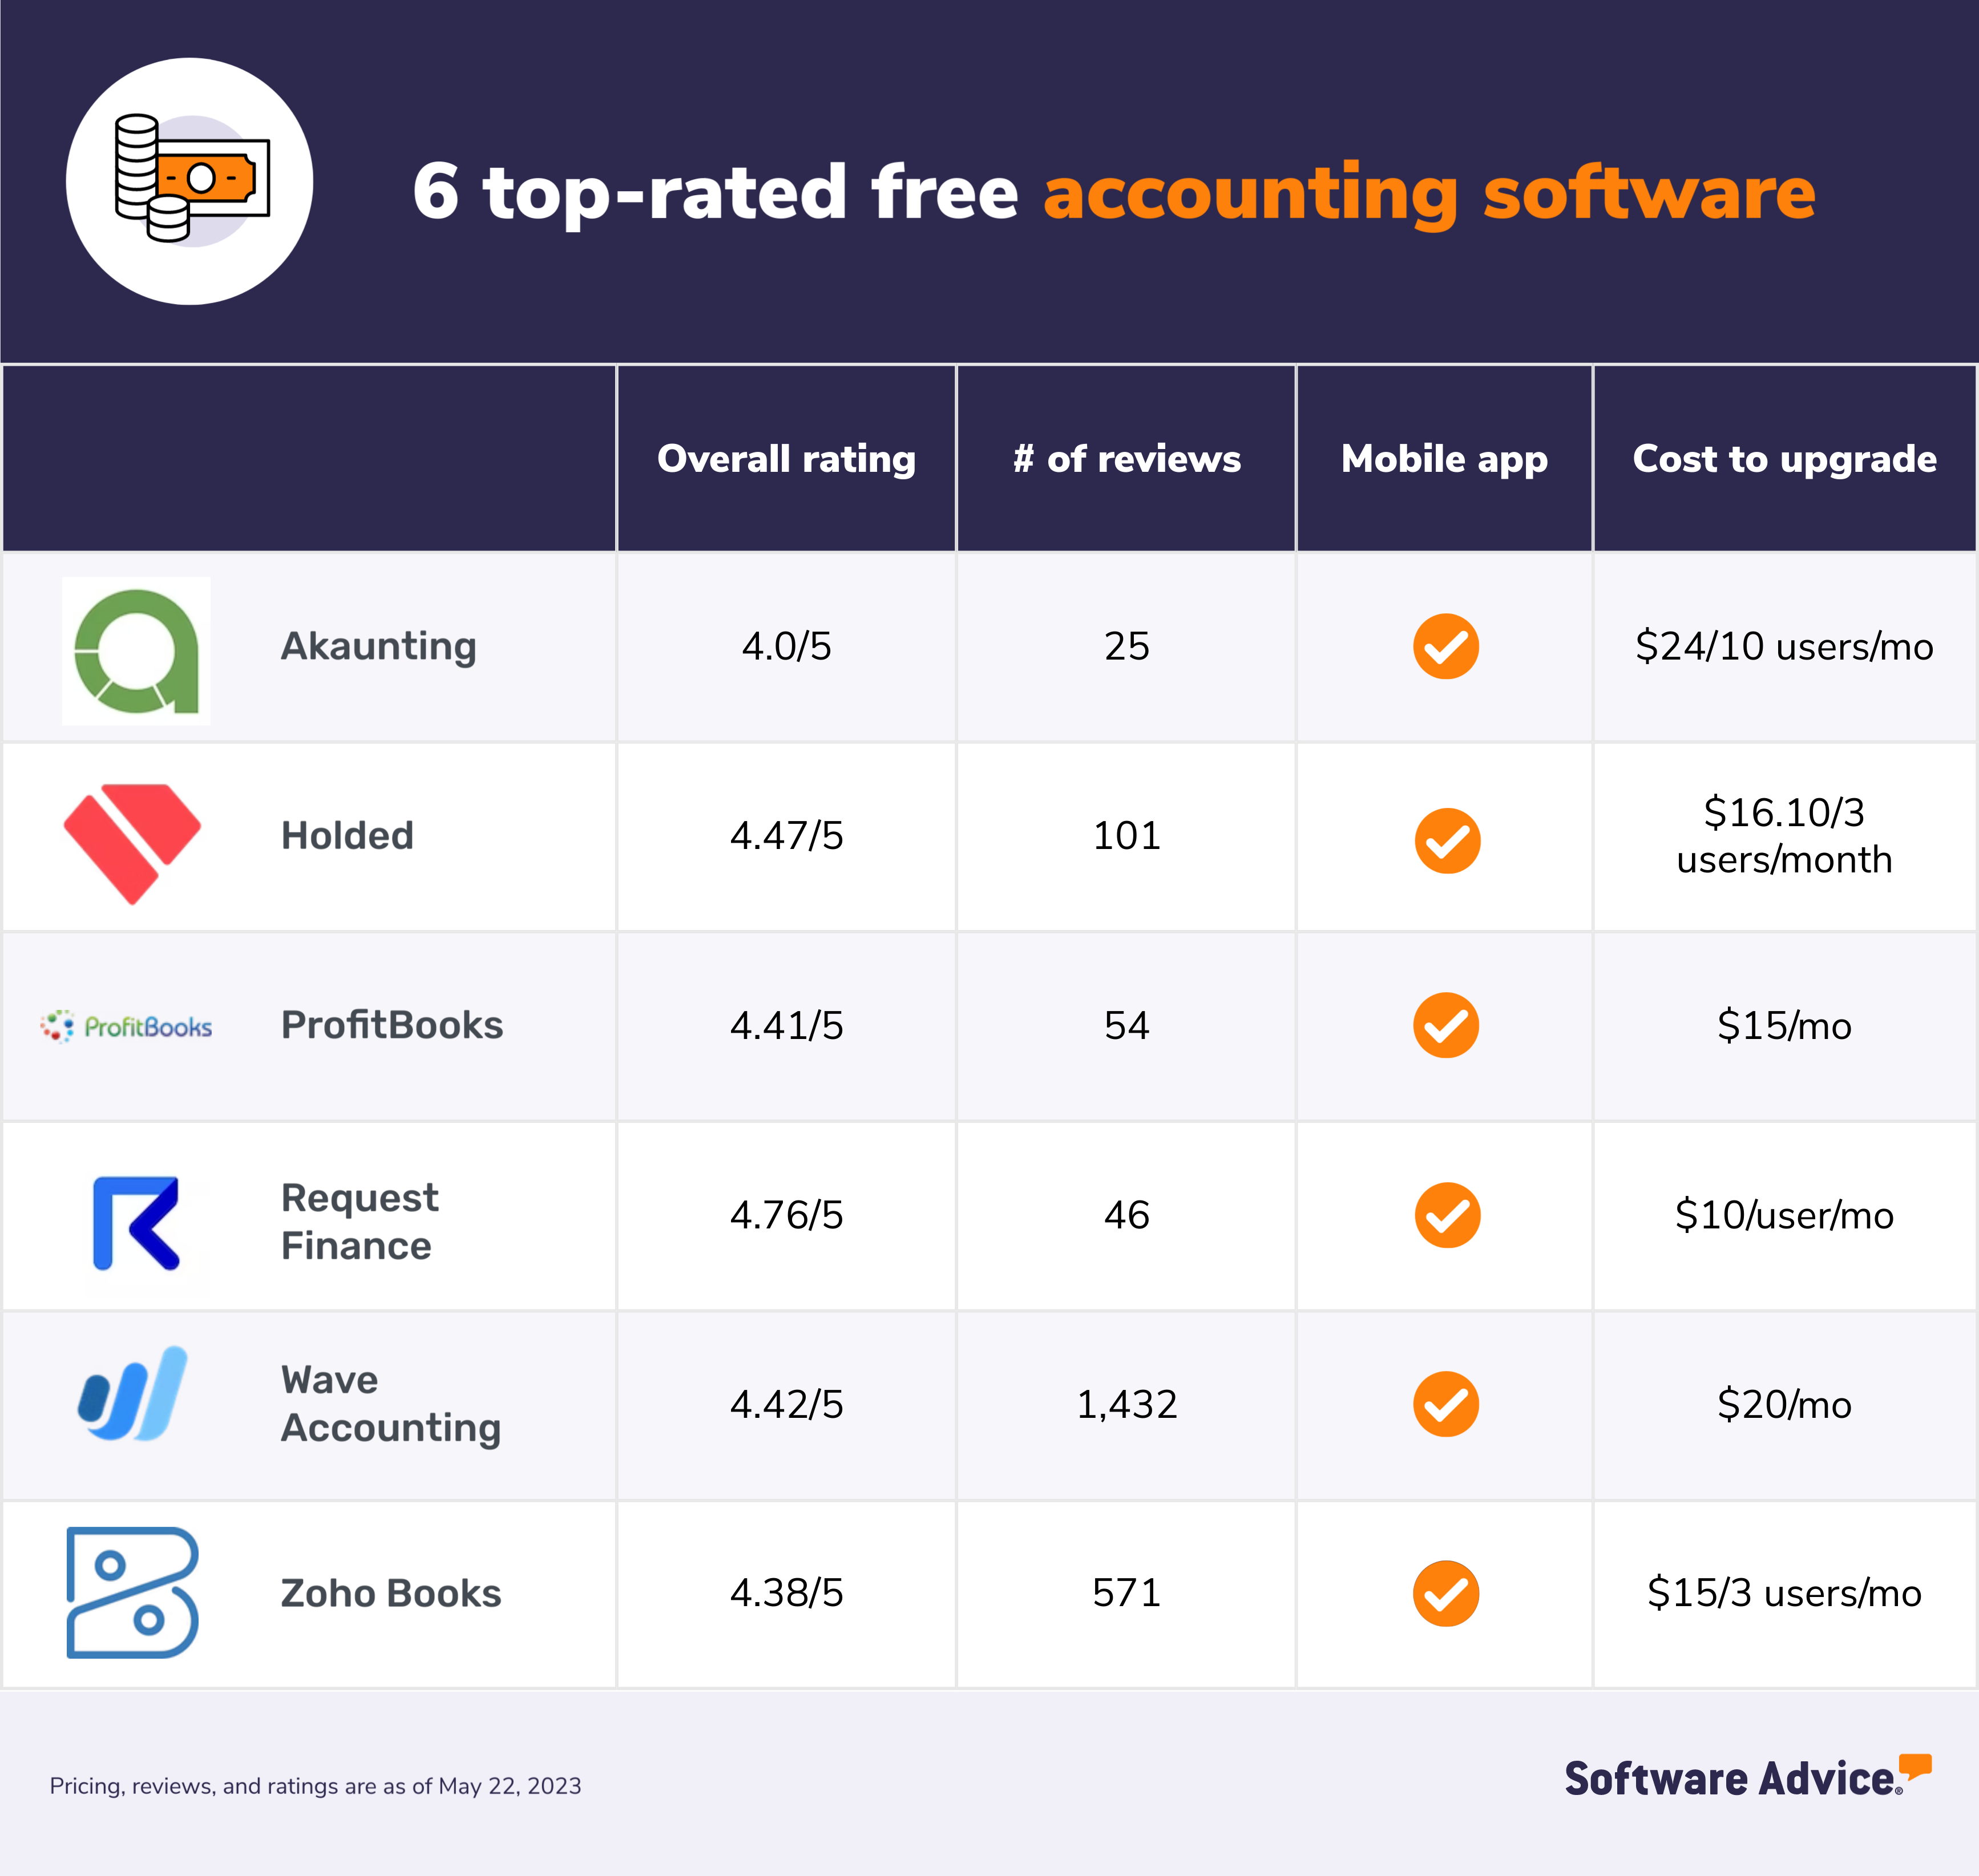 Software Advice graphic for the 6 top-rated free accounting software